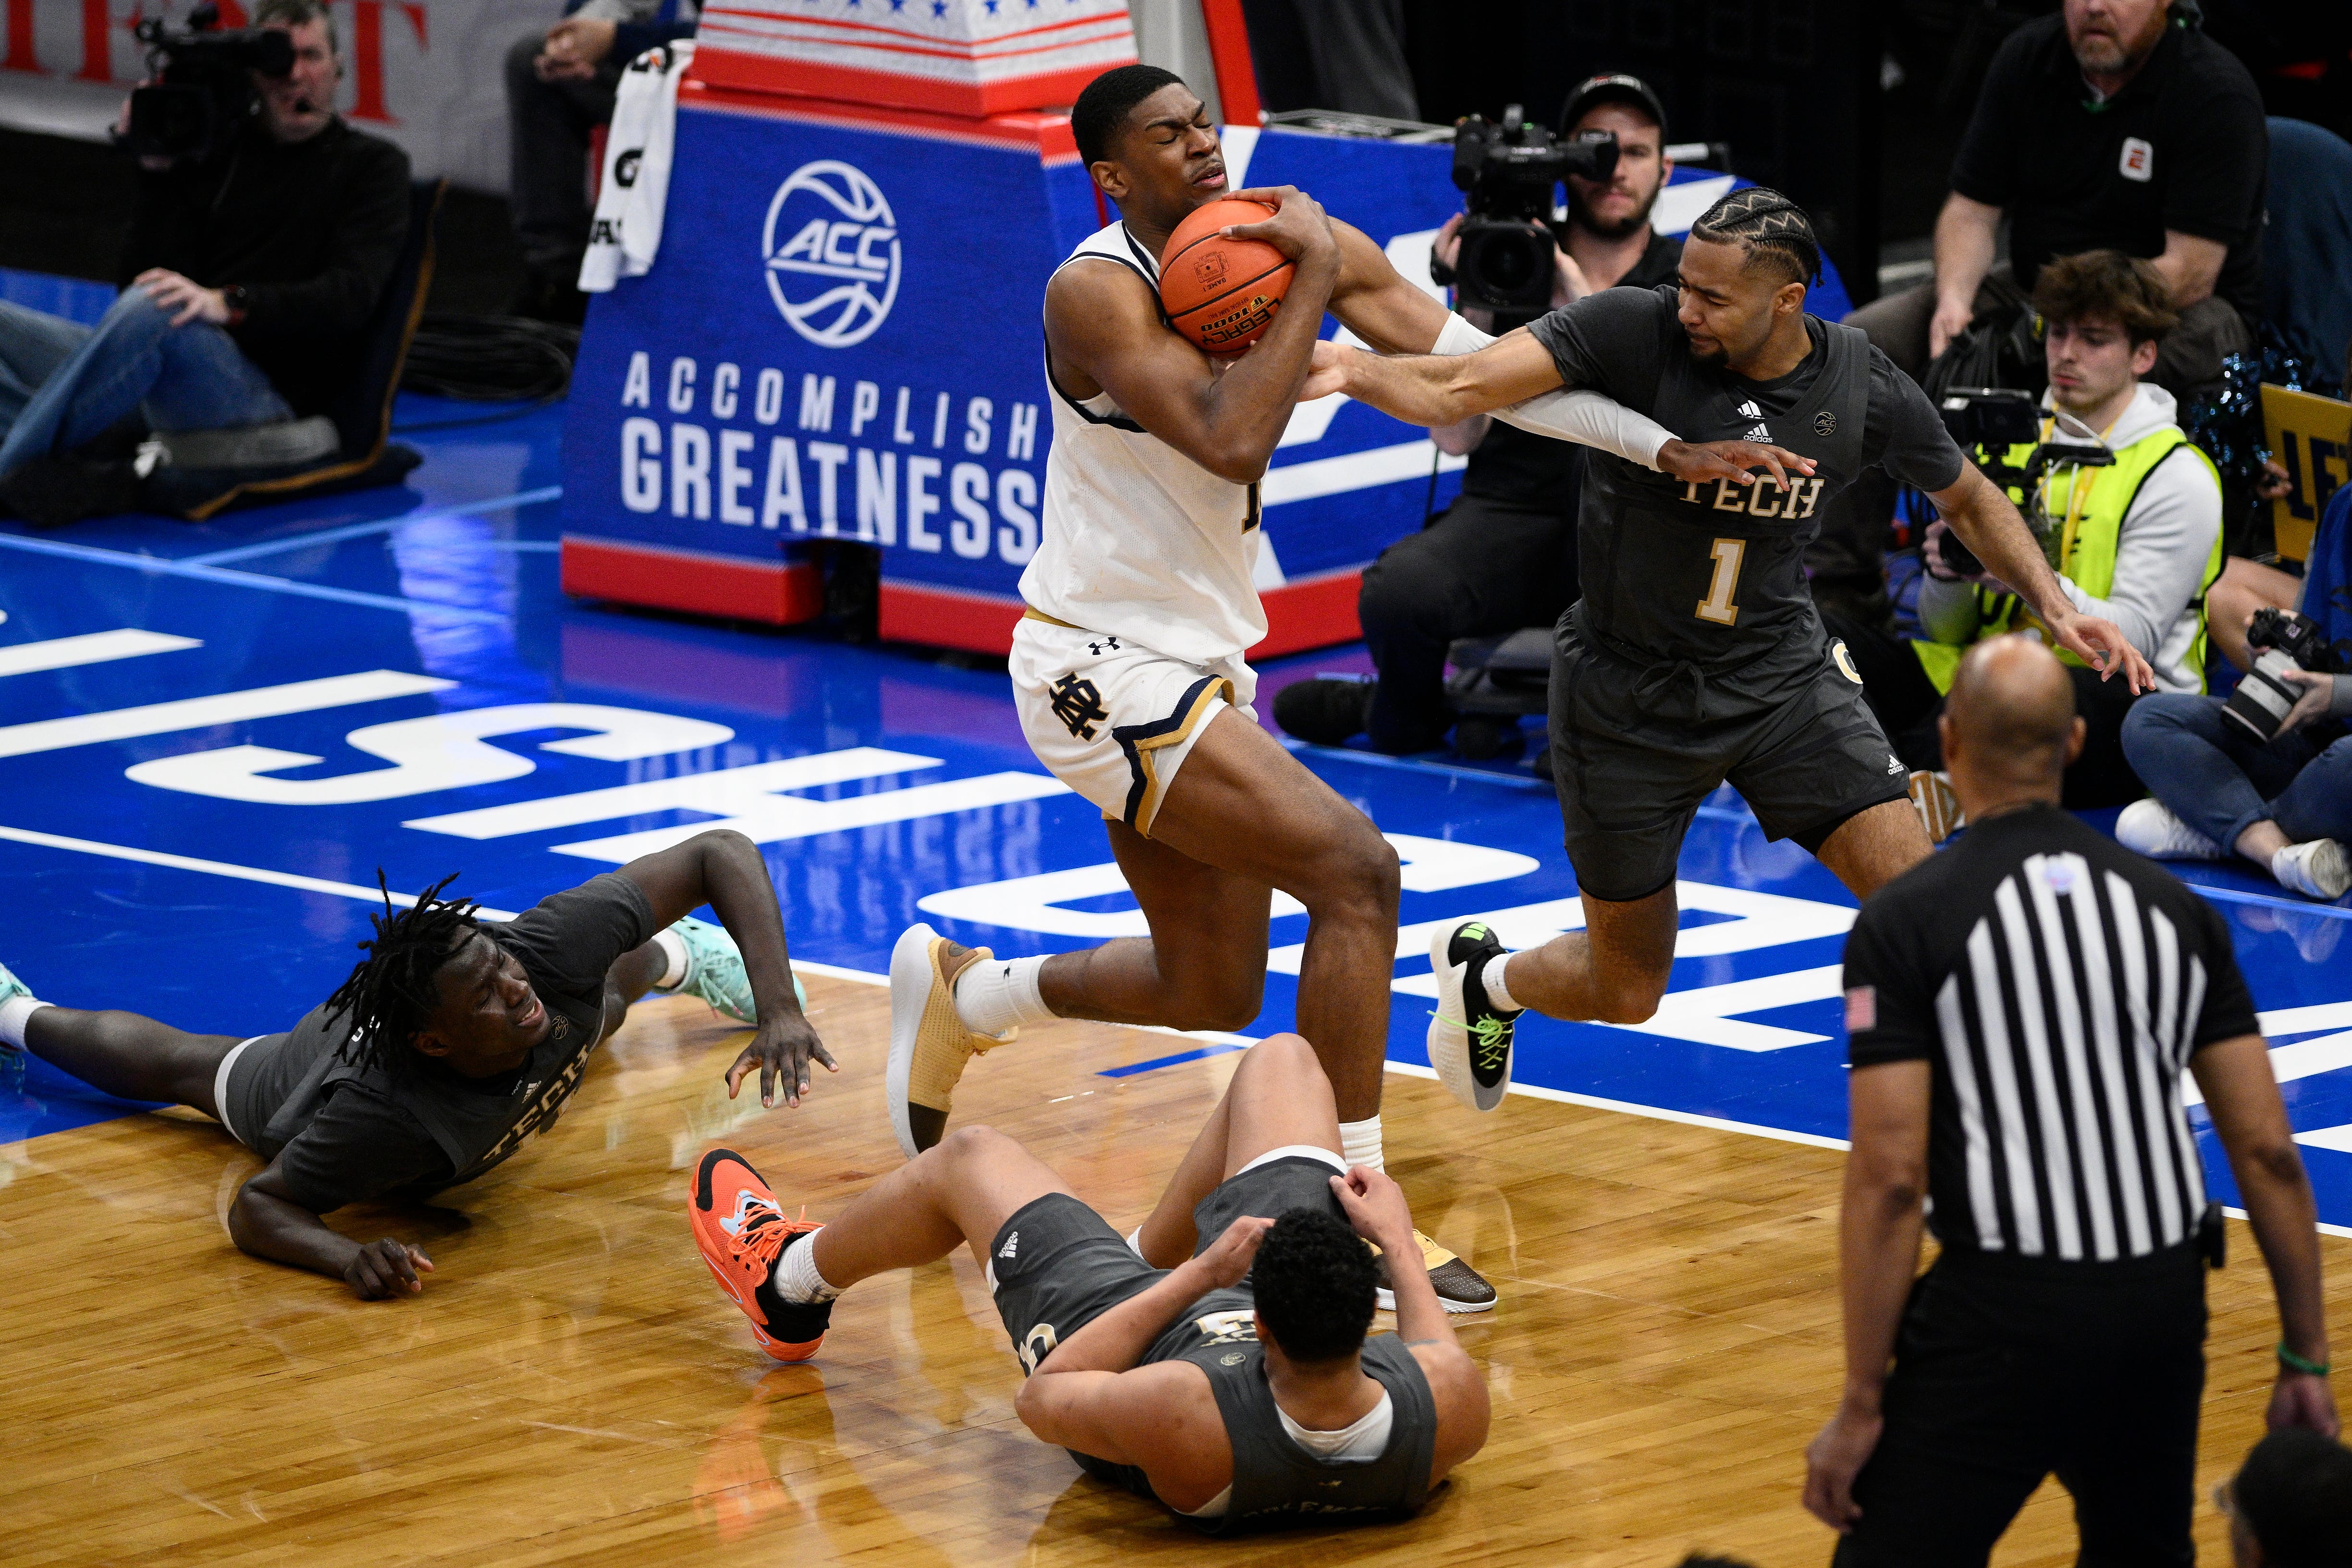 Notre Dame forward Kebba Njie (14) gains control of the ball against Georgia Tech guard Kyle Sturdivant (1) during the second half of the Atlantic Coast Conference NCAA college basketball tournament, Tuesday, March 12, 2024, in Washington. (AP Photo/Nick Wass)